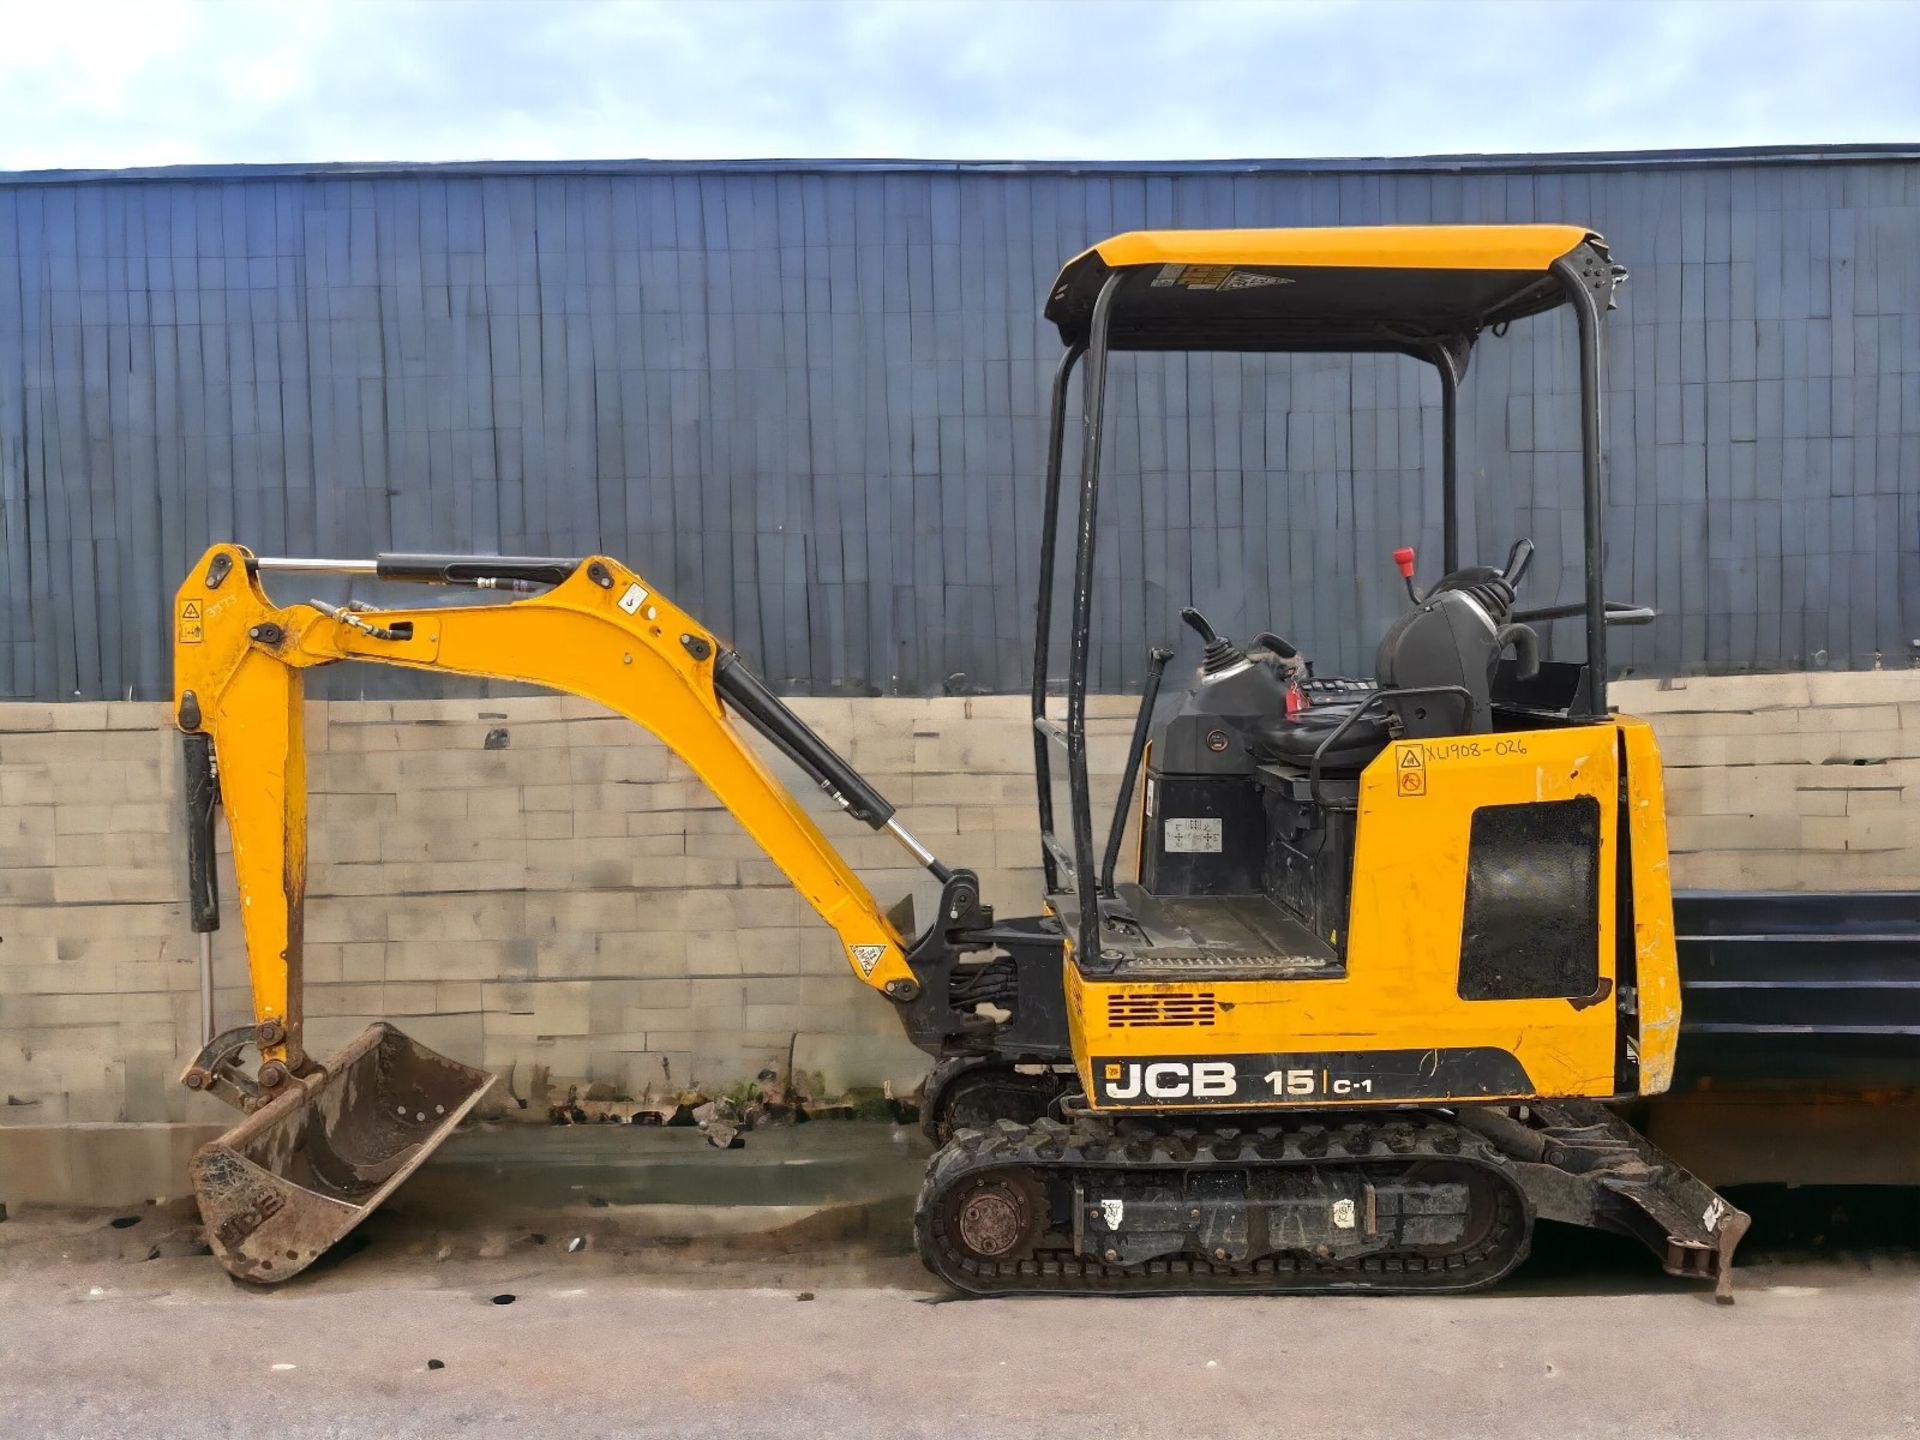 ELEVATE YOUR CONSTRUCTION GAME WITH THE JCB 15 C-1 MINI EXCAVATO